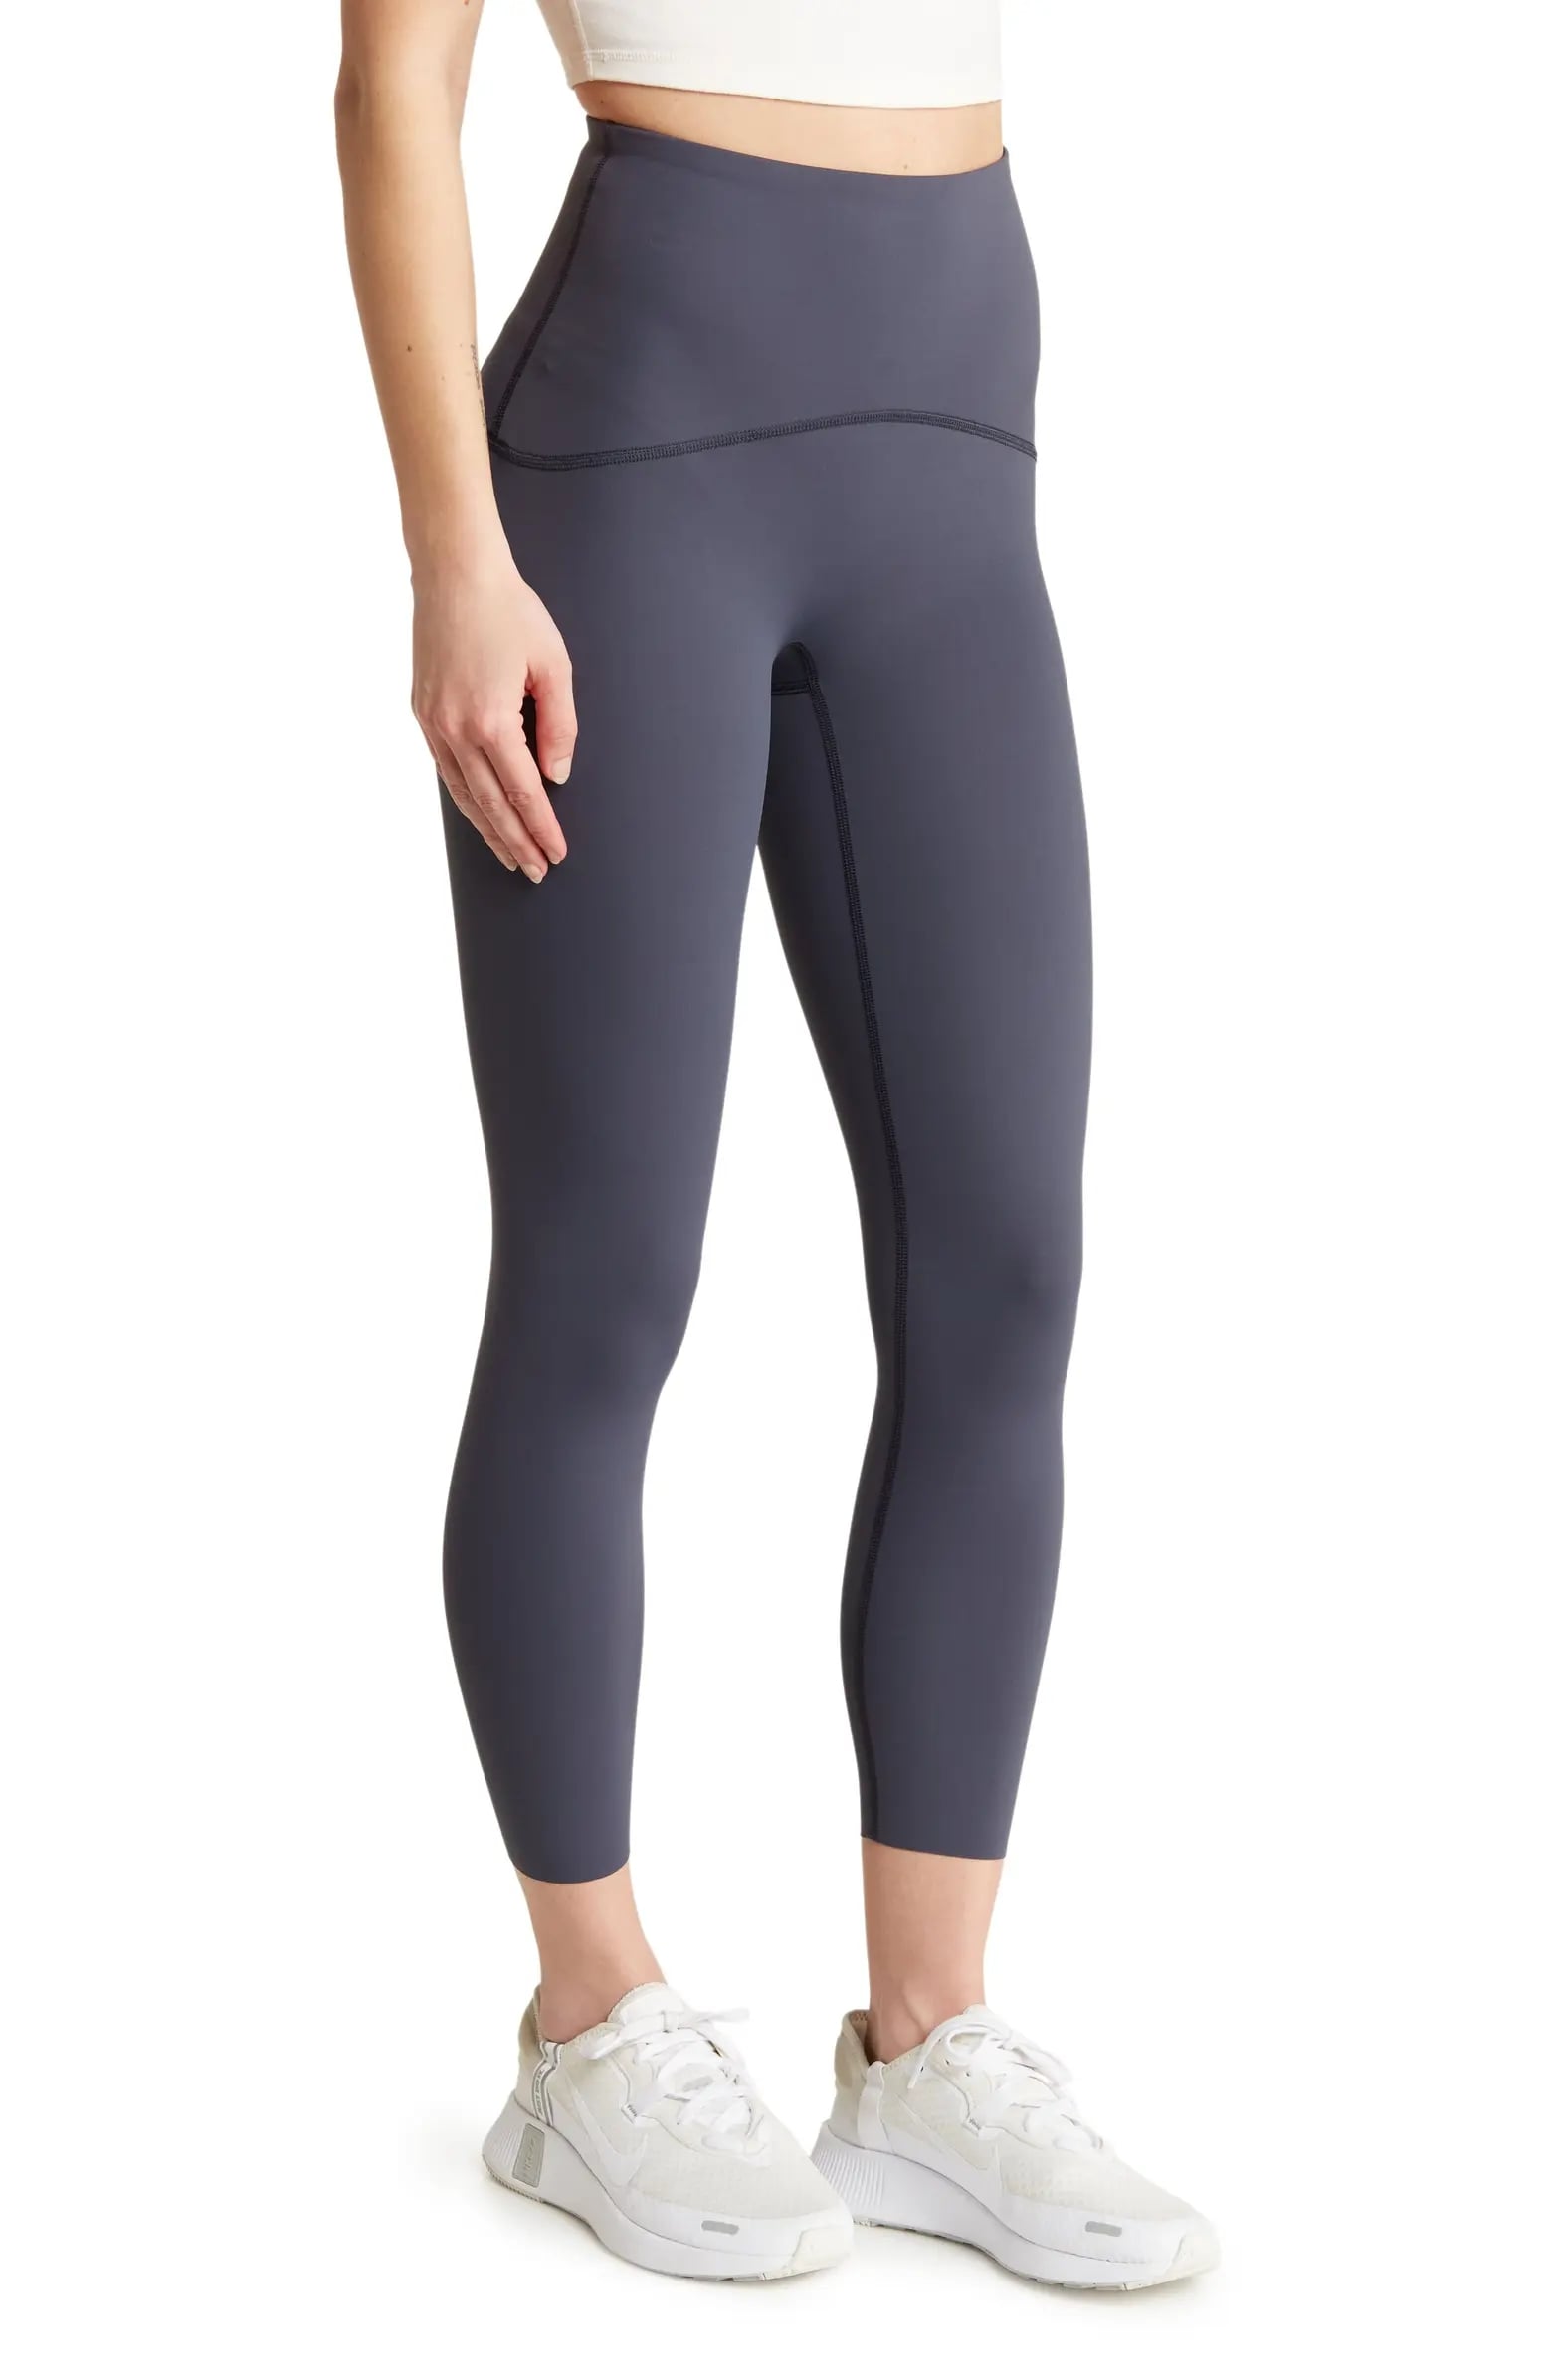 $120 vs. $40 A detailed comparison of the lululemon and